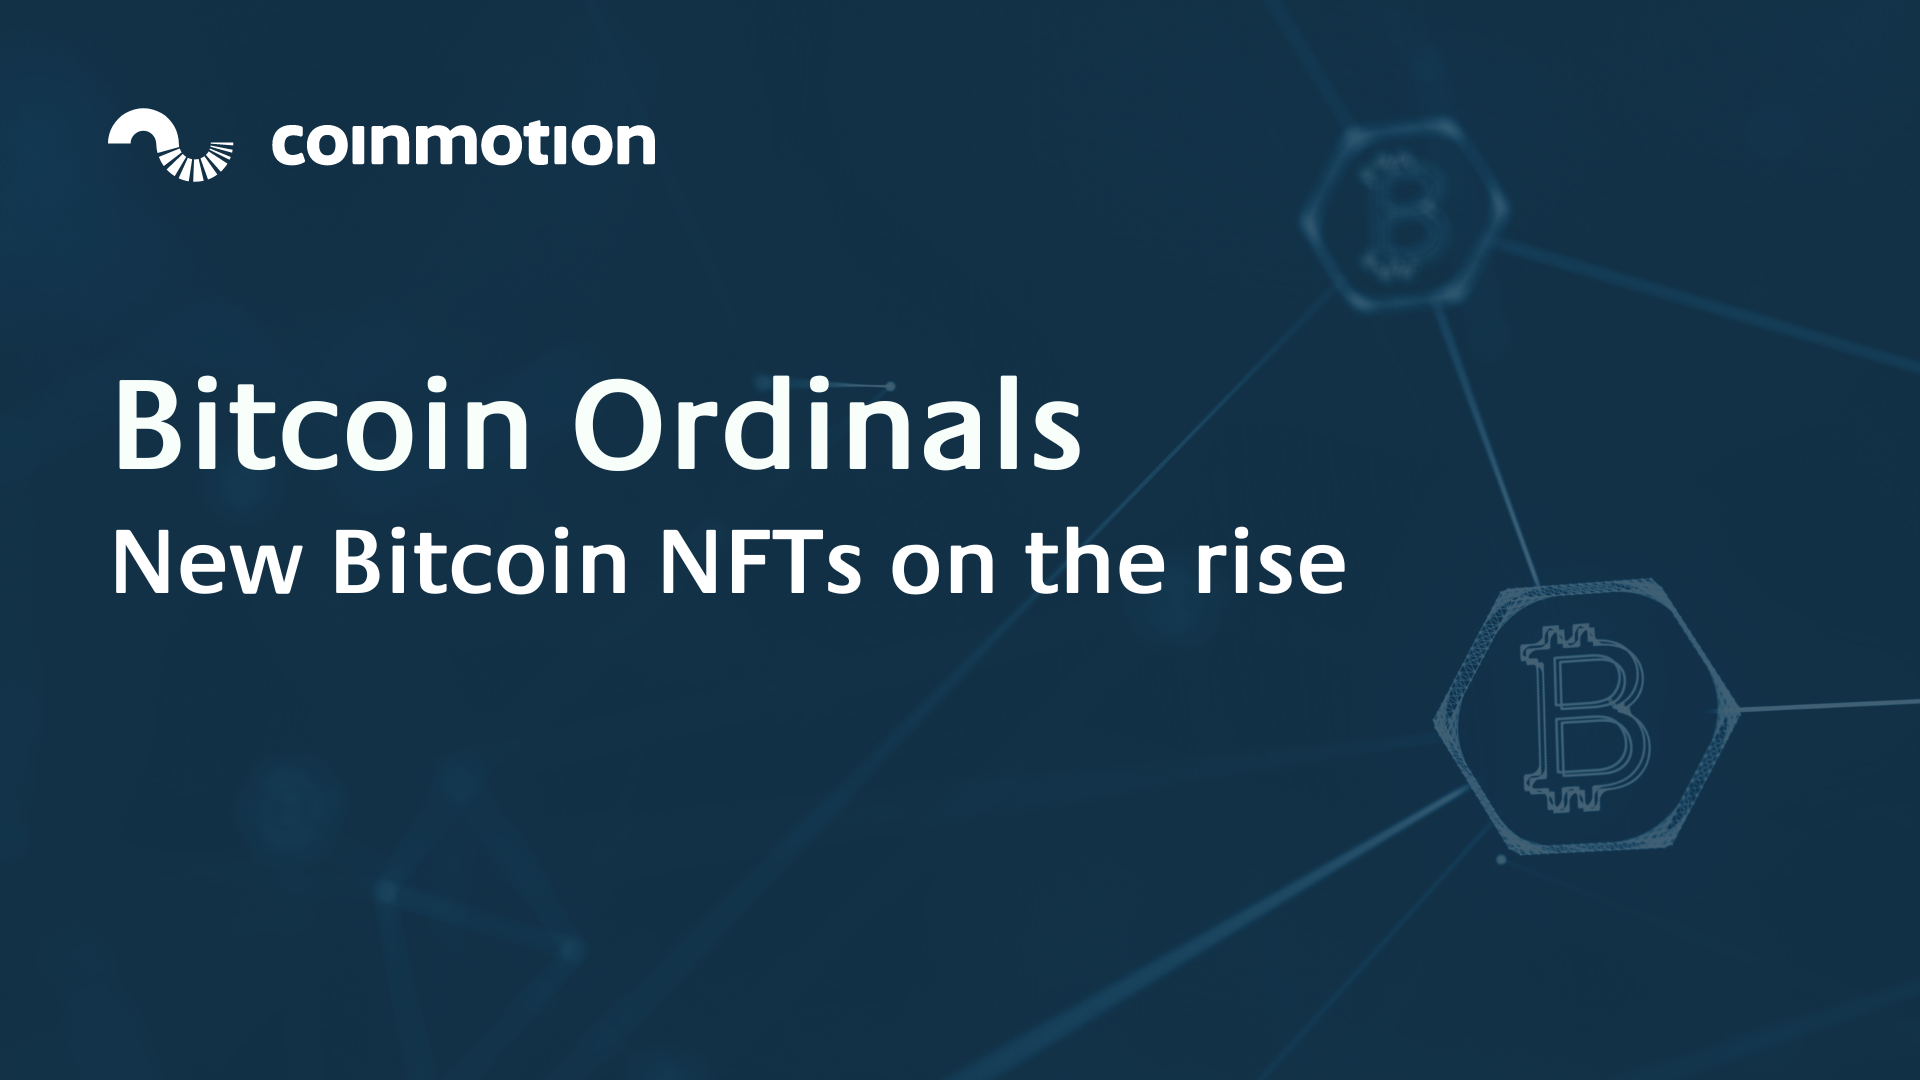 New Bitcoin NFTs spark discussion — What are Bitcoin Ordinals?